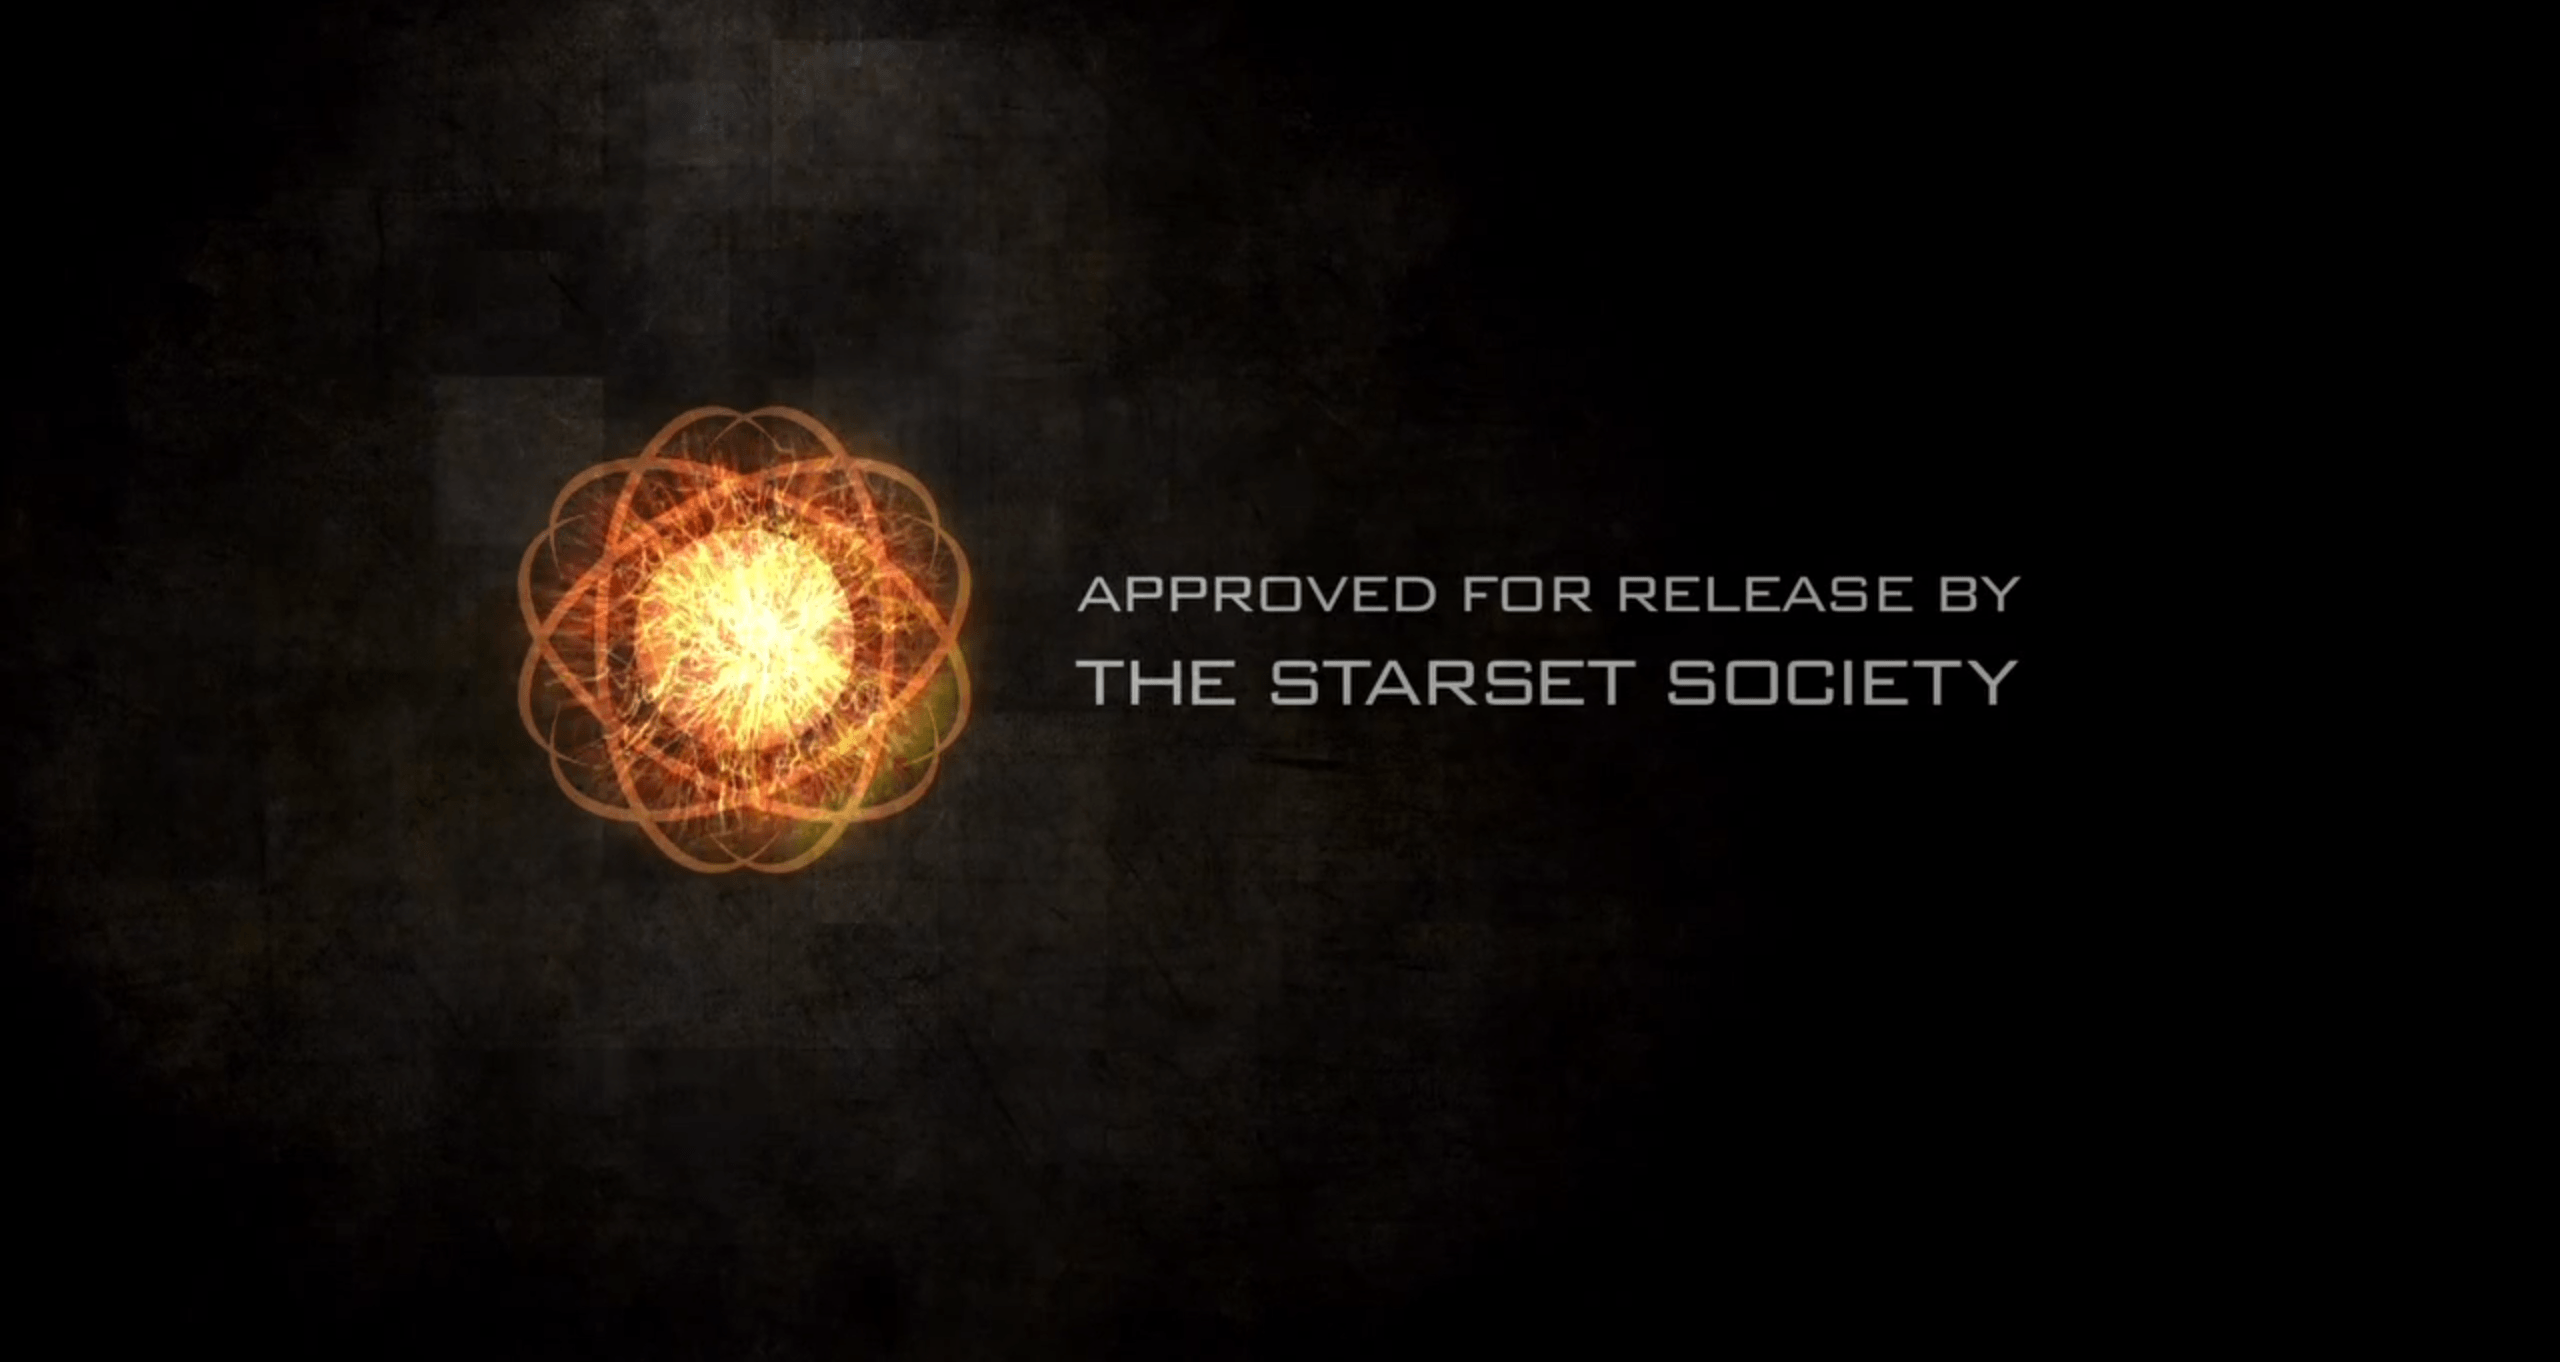 We are commissioned by The Starset Society to spread their message